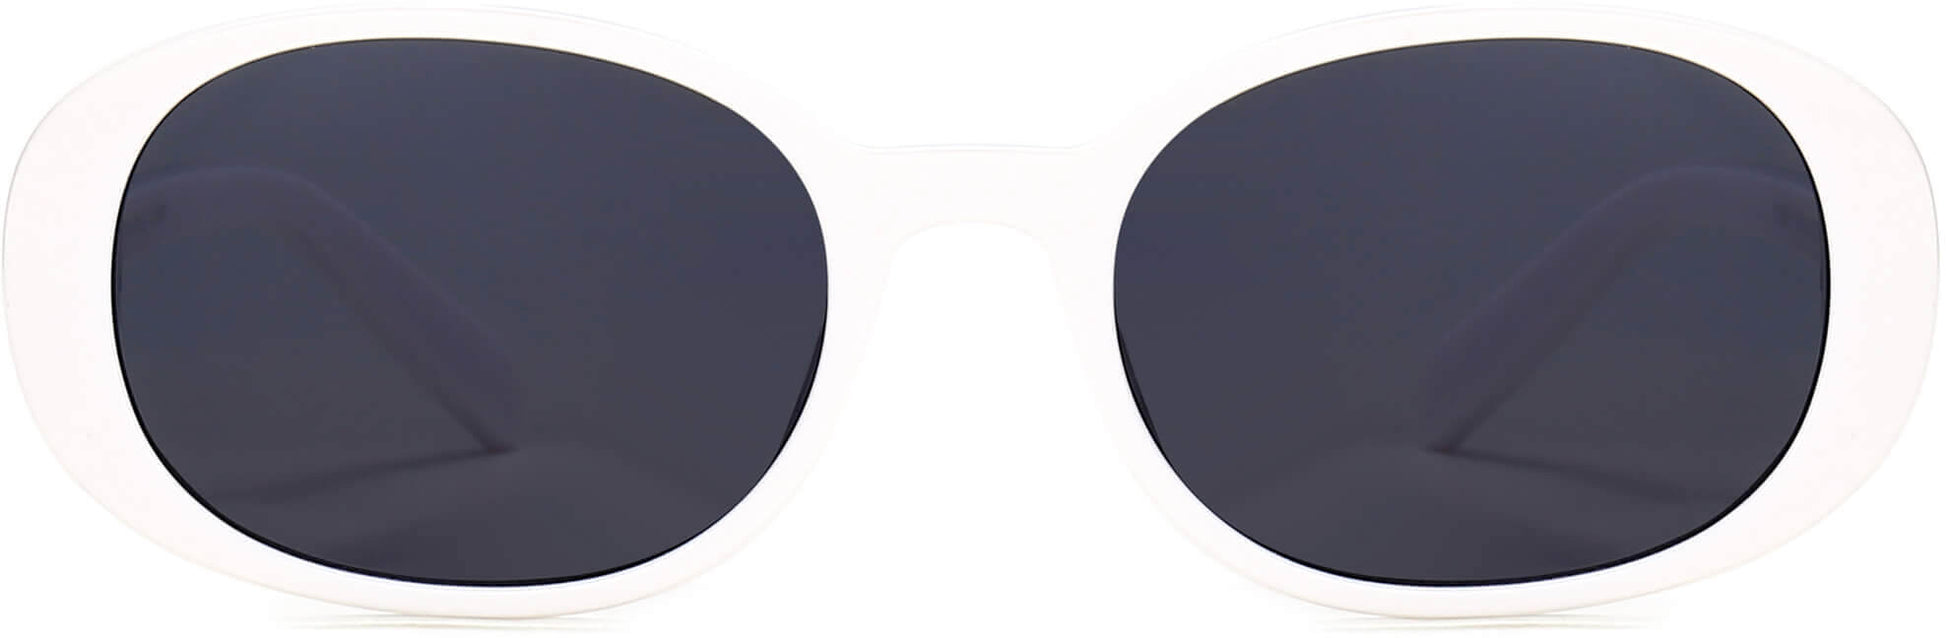 Emery White Plastic Sunglasses from ANRRI, front view